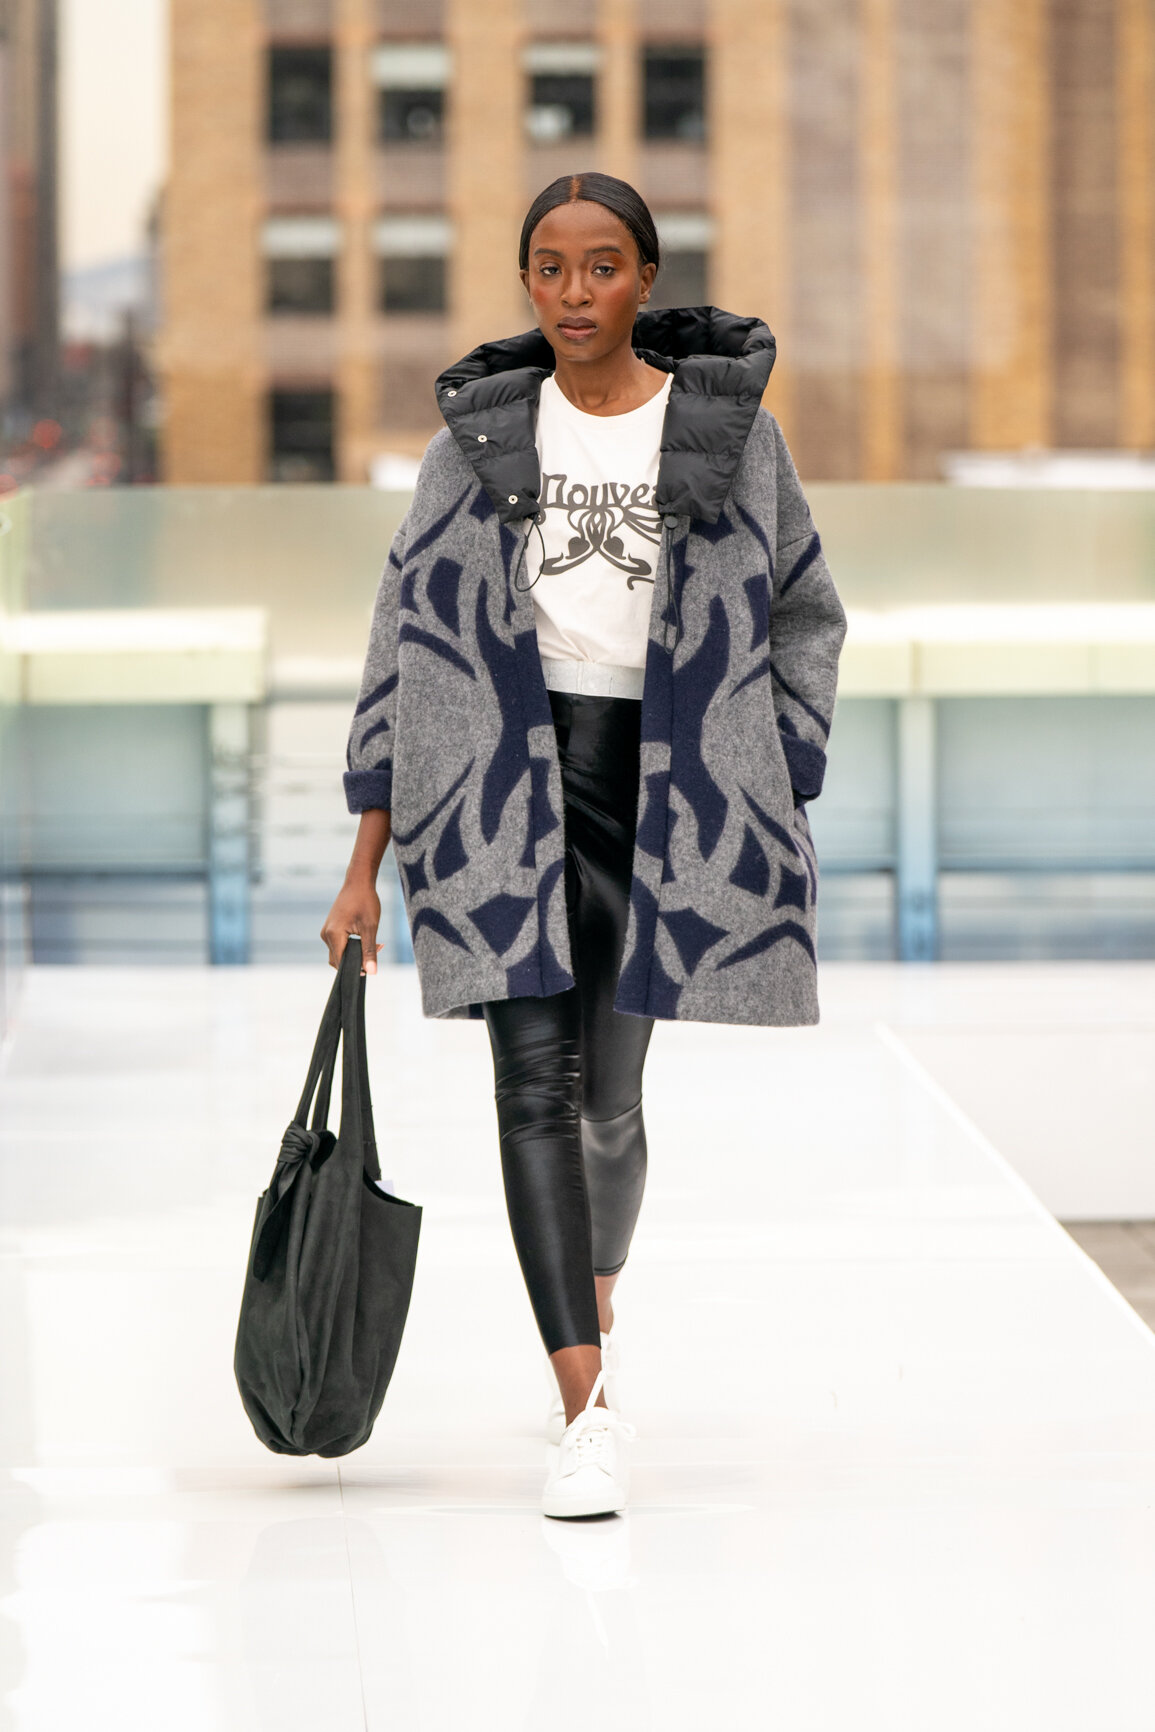 LOUIS VUITTON AND THE BASOTHO BLANKET